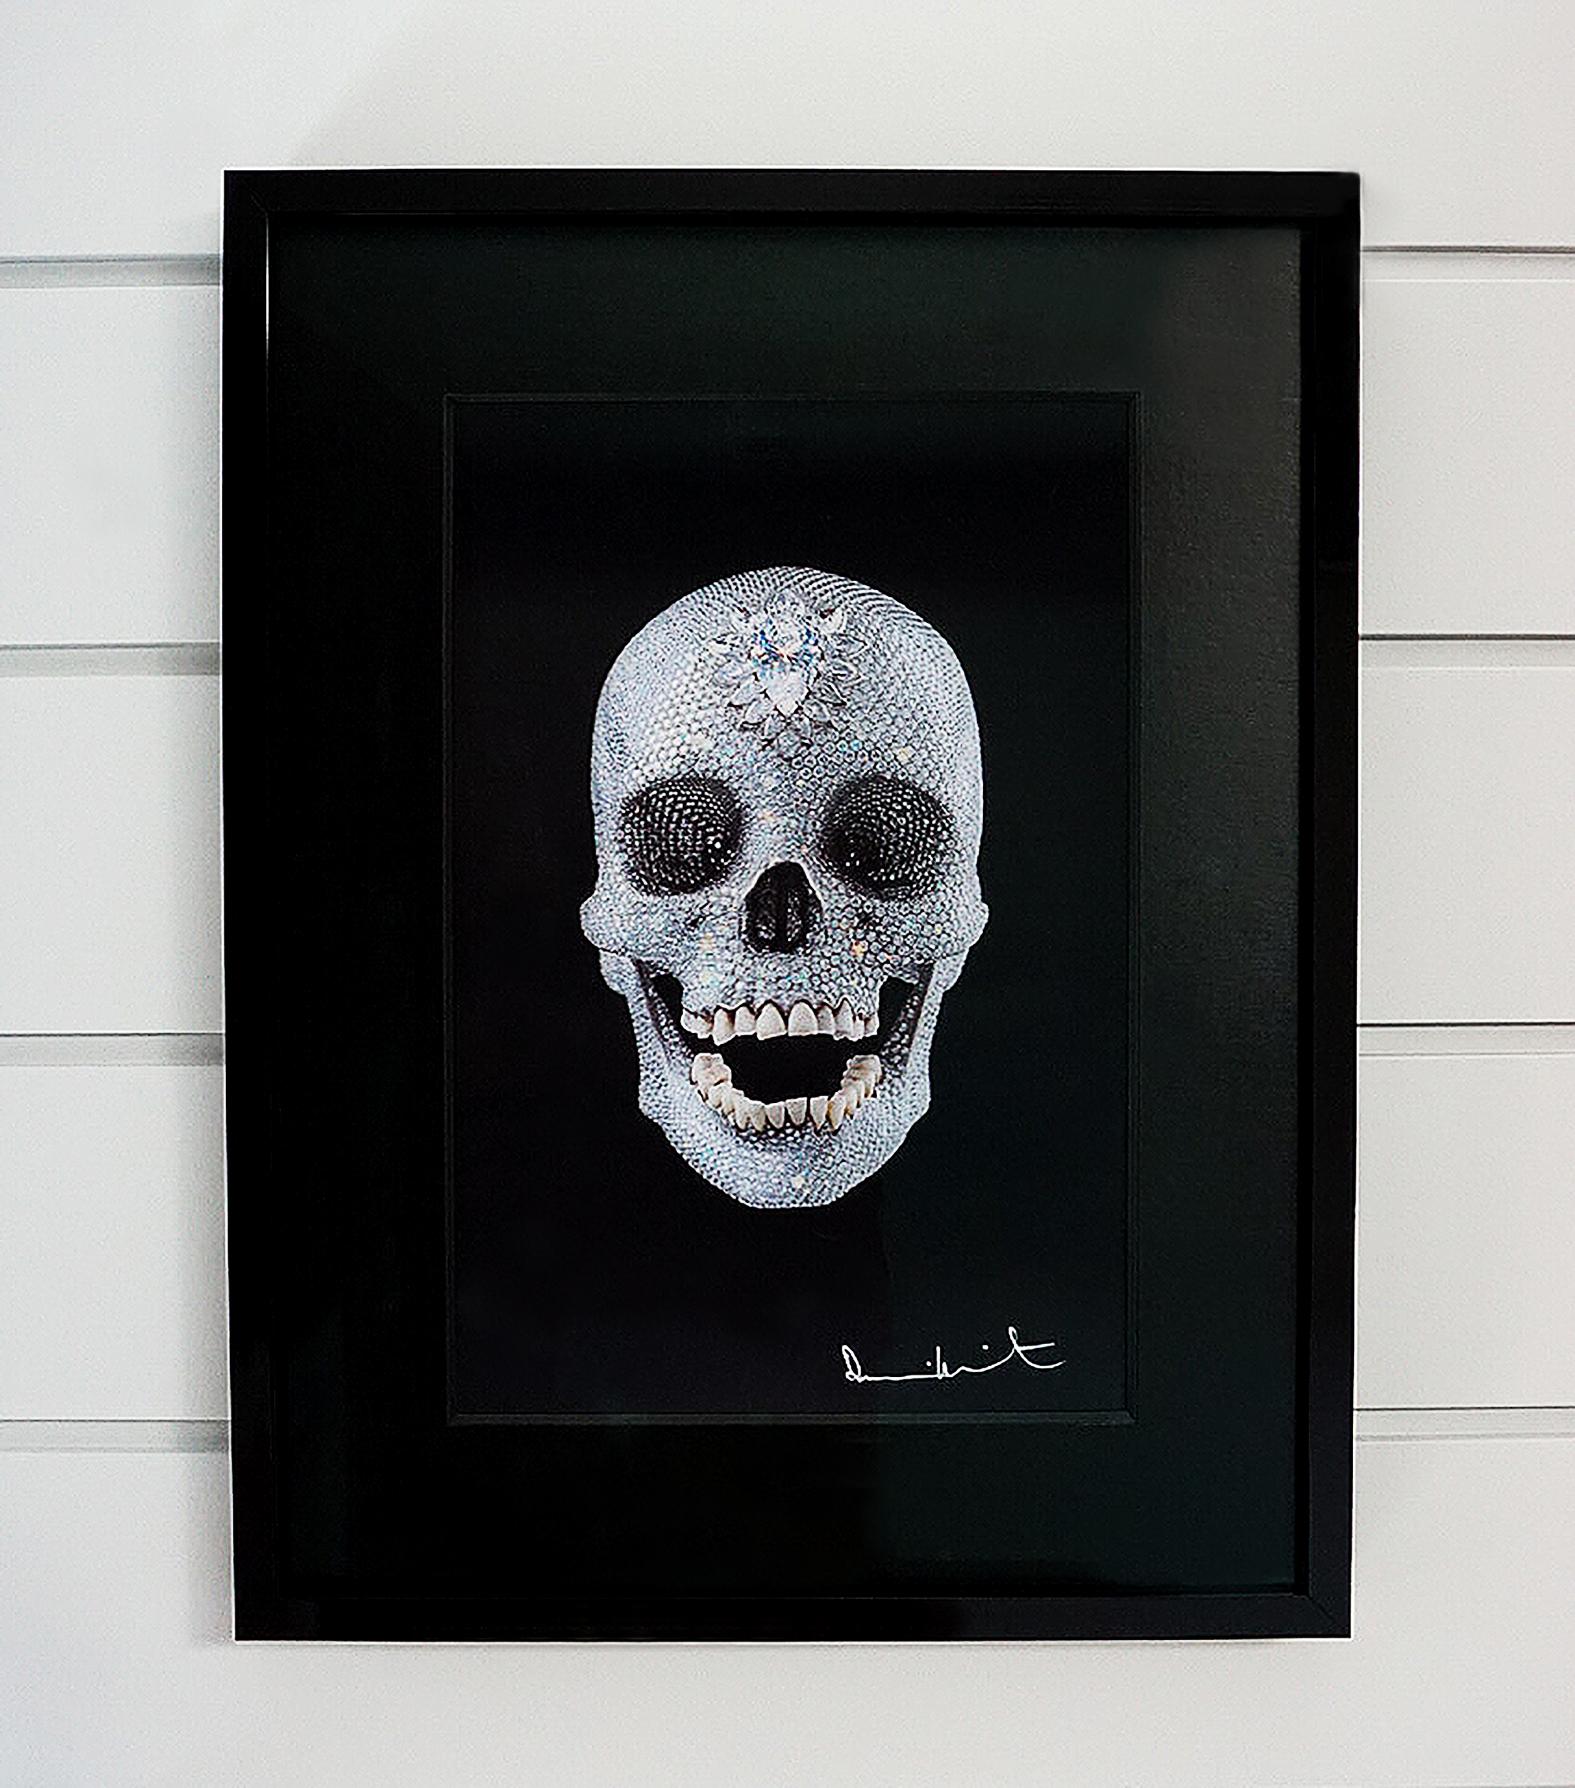 A brilliant lenticular print of a three dimensional Skull created by Damien Hirst, entitled: "For The Love Of God". The artwork comes ready to install in a custom black lacquer frame with complementing black textured matte. The shimmering effects of